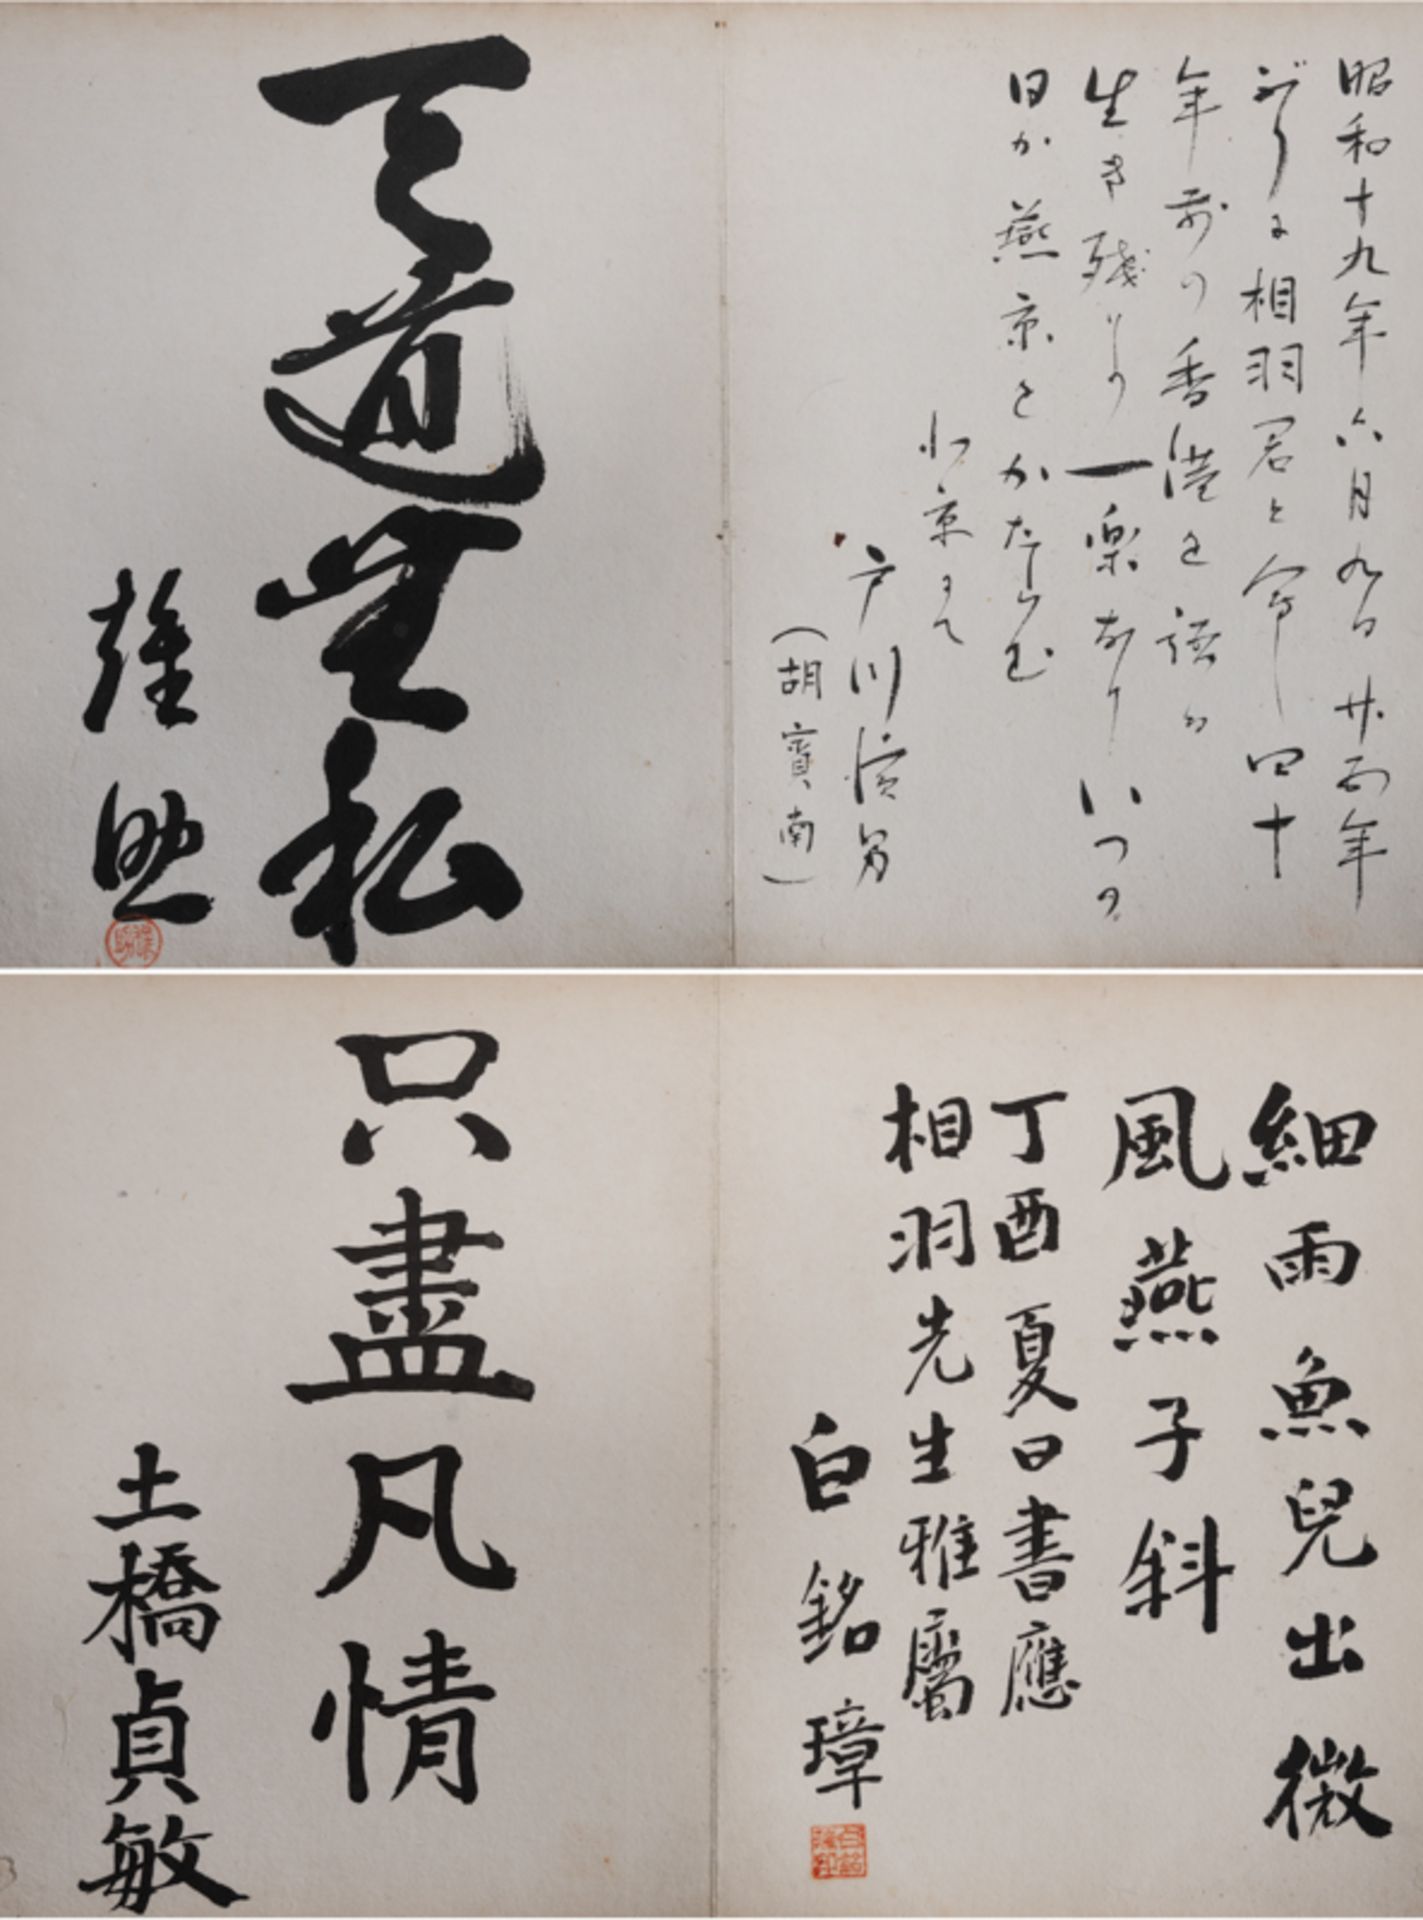 A BOOK OF CALLIGRAPHIES FROM SOME EAST ASIAN CELEBRITIES 東亞名人題字紀念冊頁 - Image 10 of 16